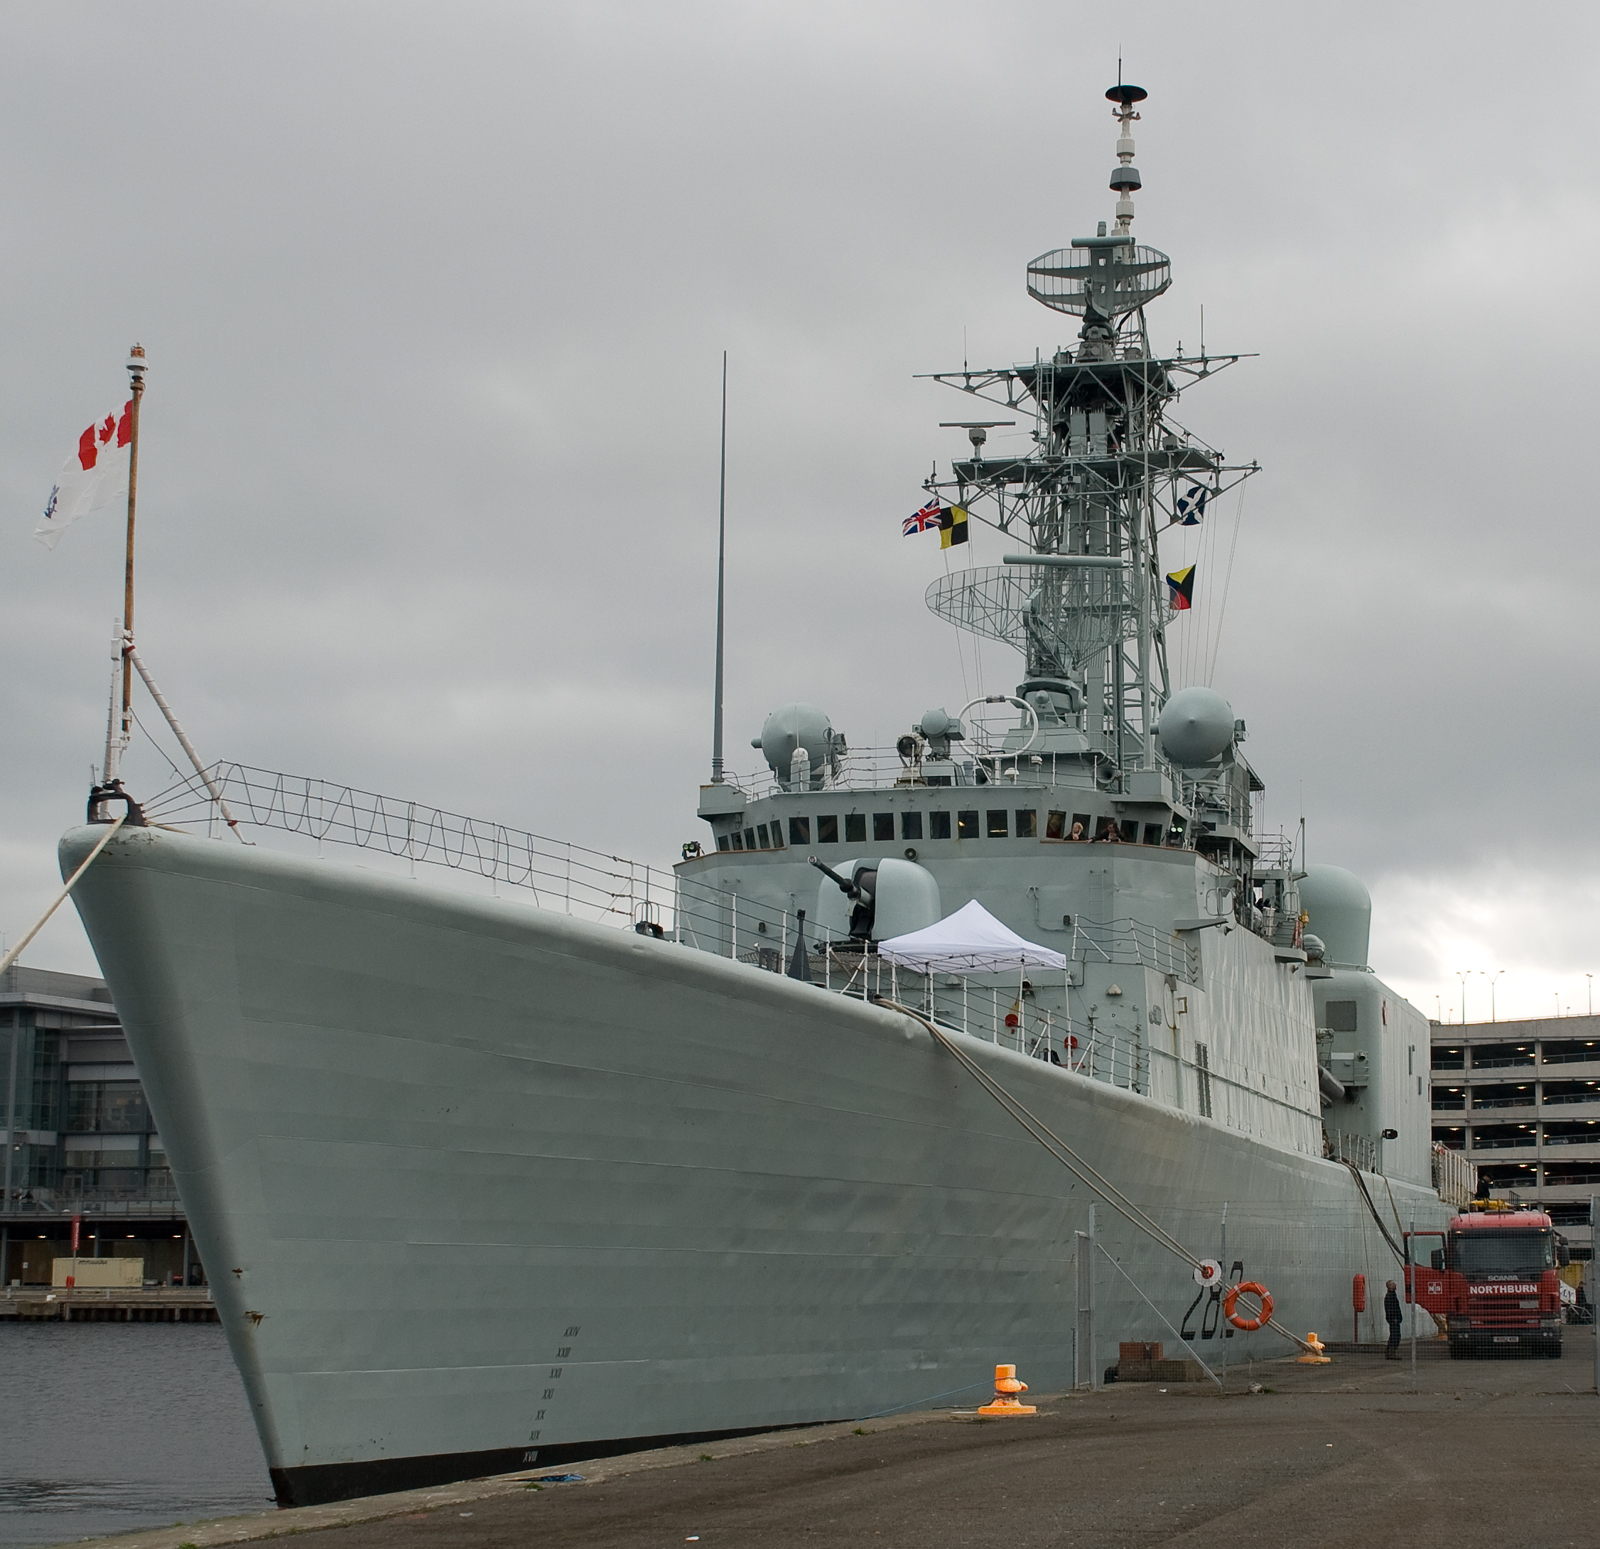 Marine Recycling to dispose of HMCS Athabaskan